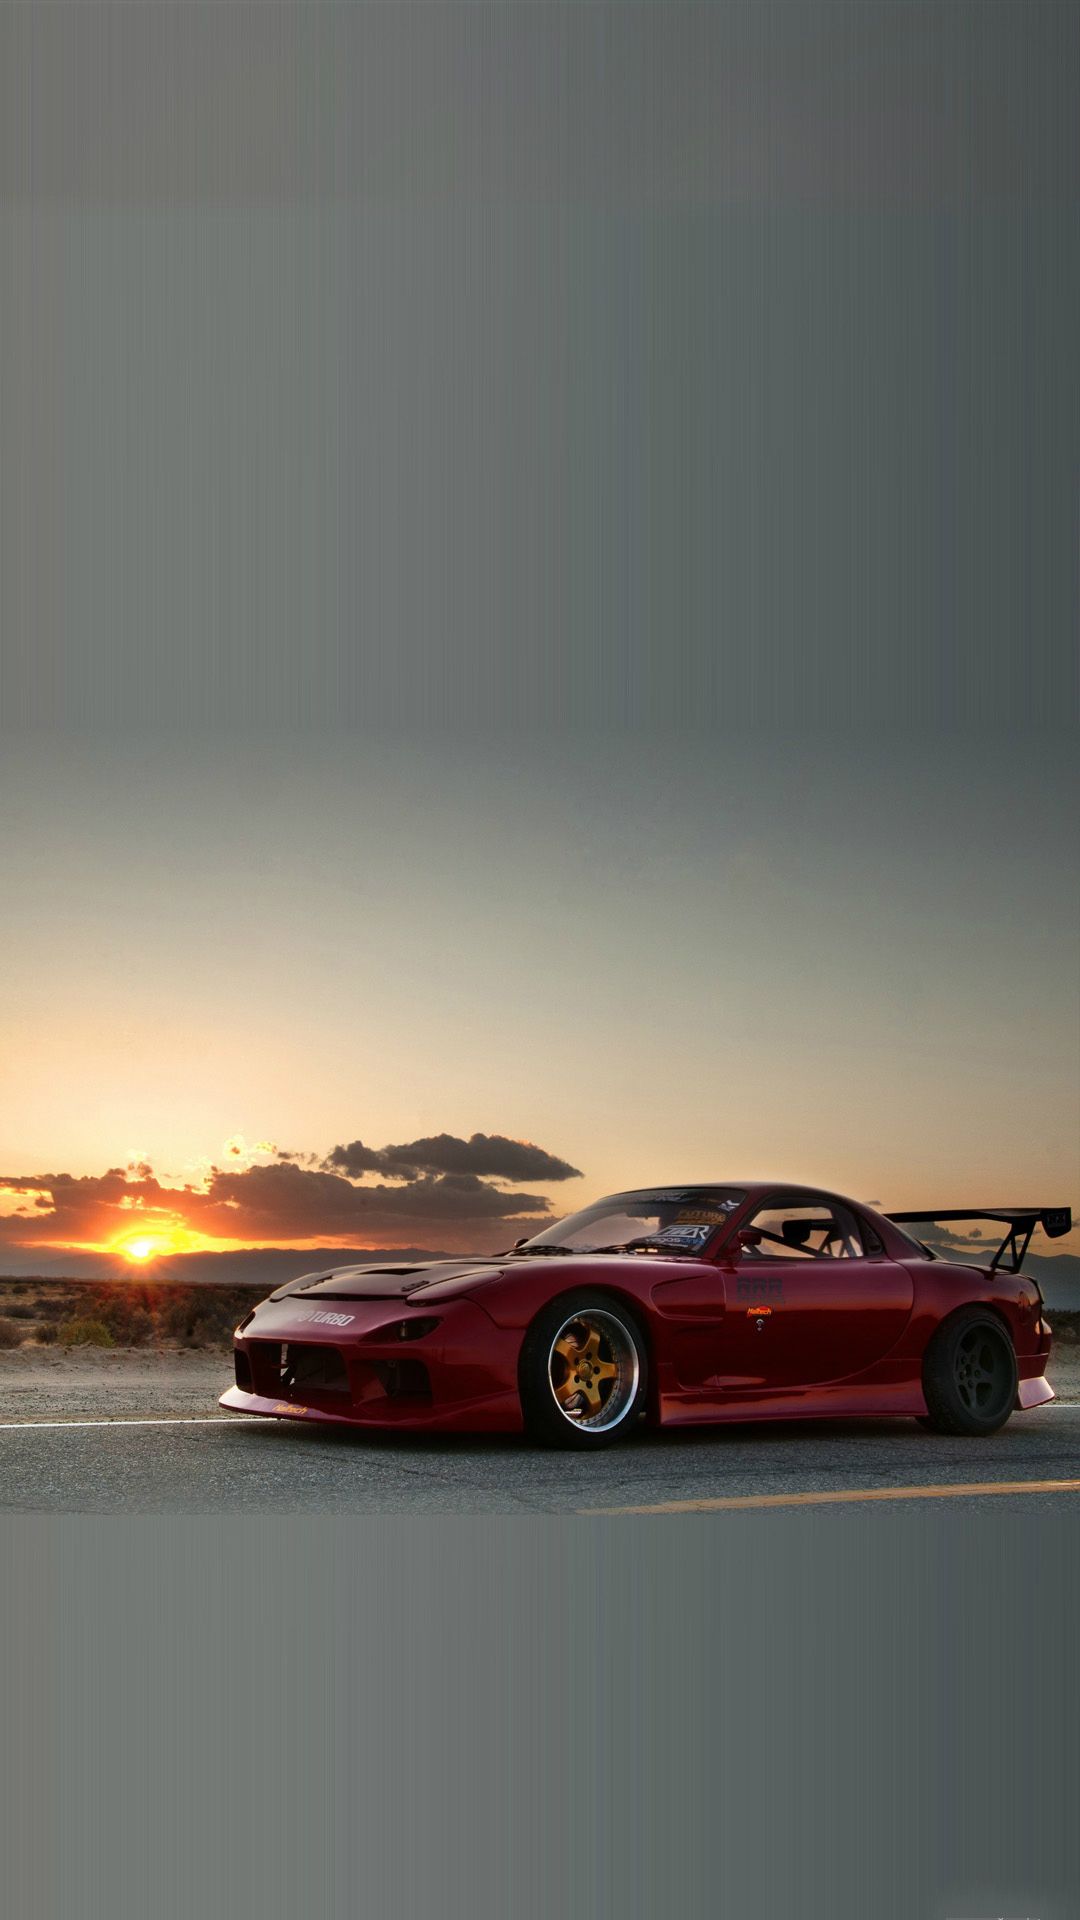 RX7 iPhone Wallpaper Free RX7 iPhone Background